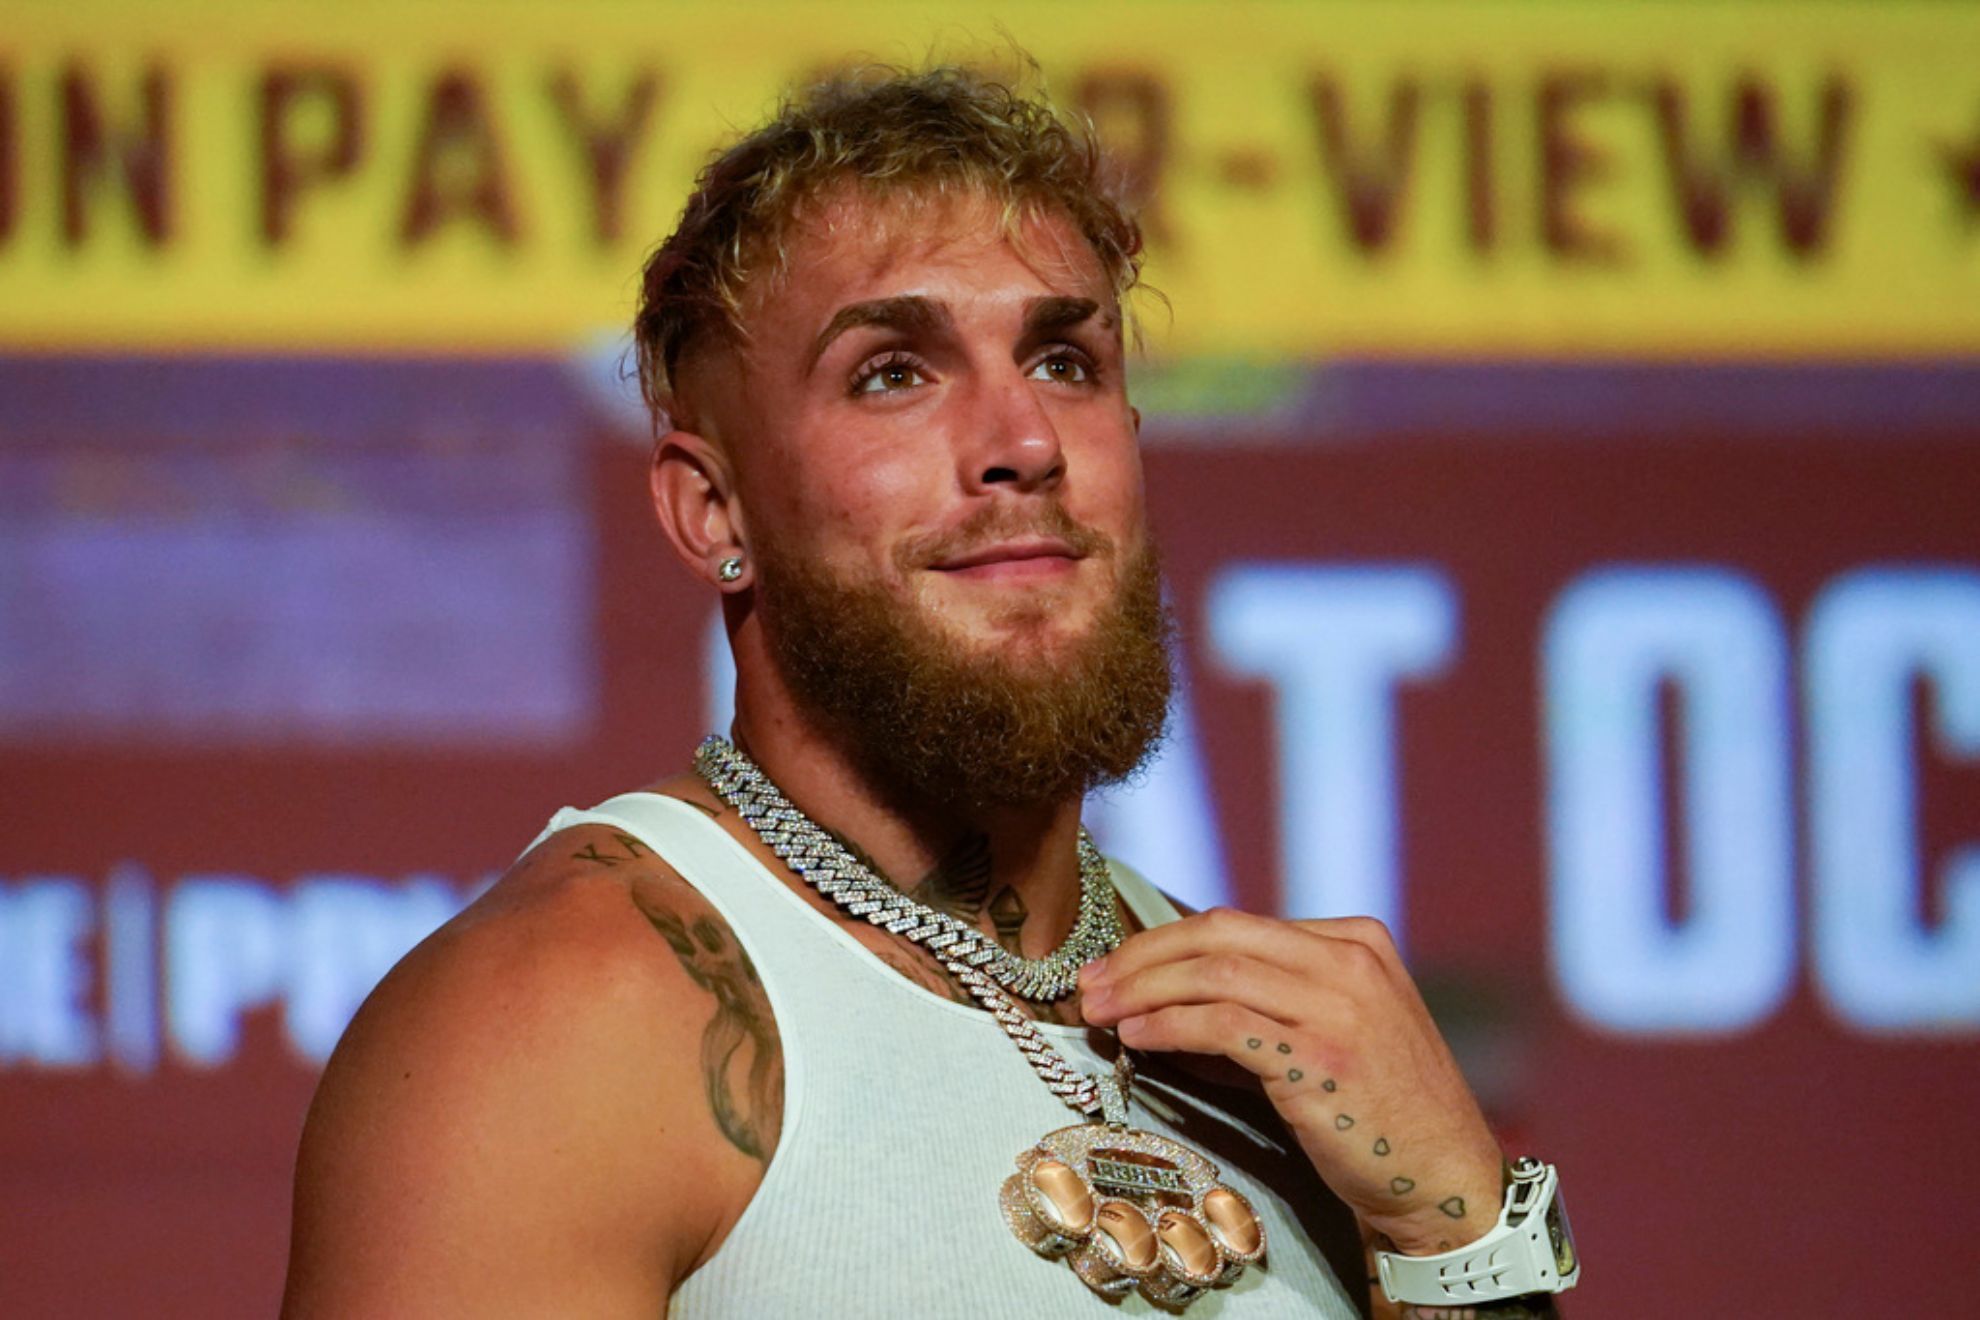 Jake Paul will have to wait for his next MMA fight